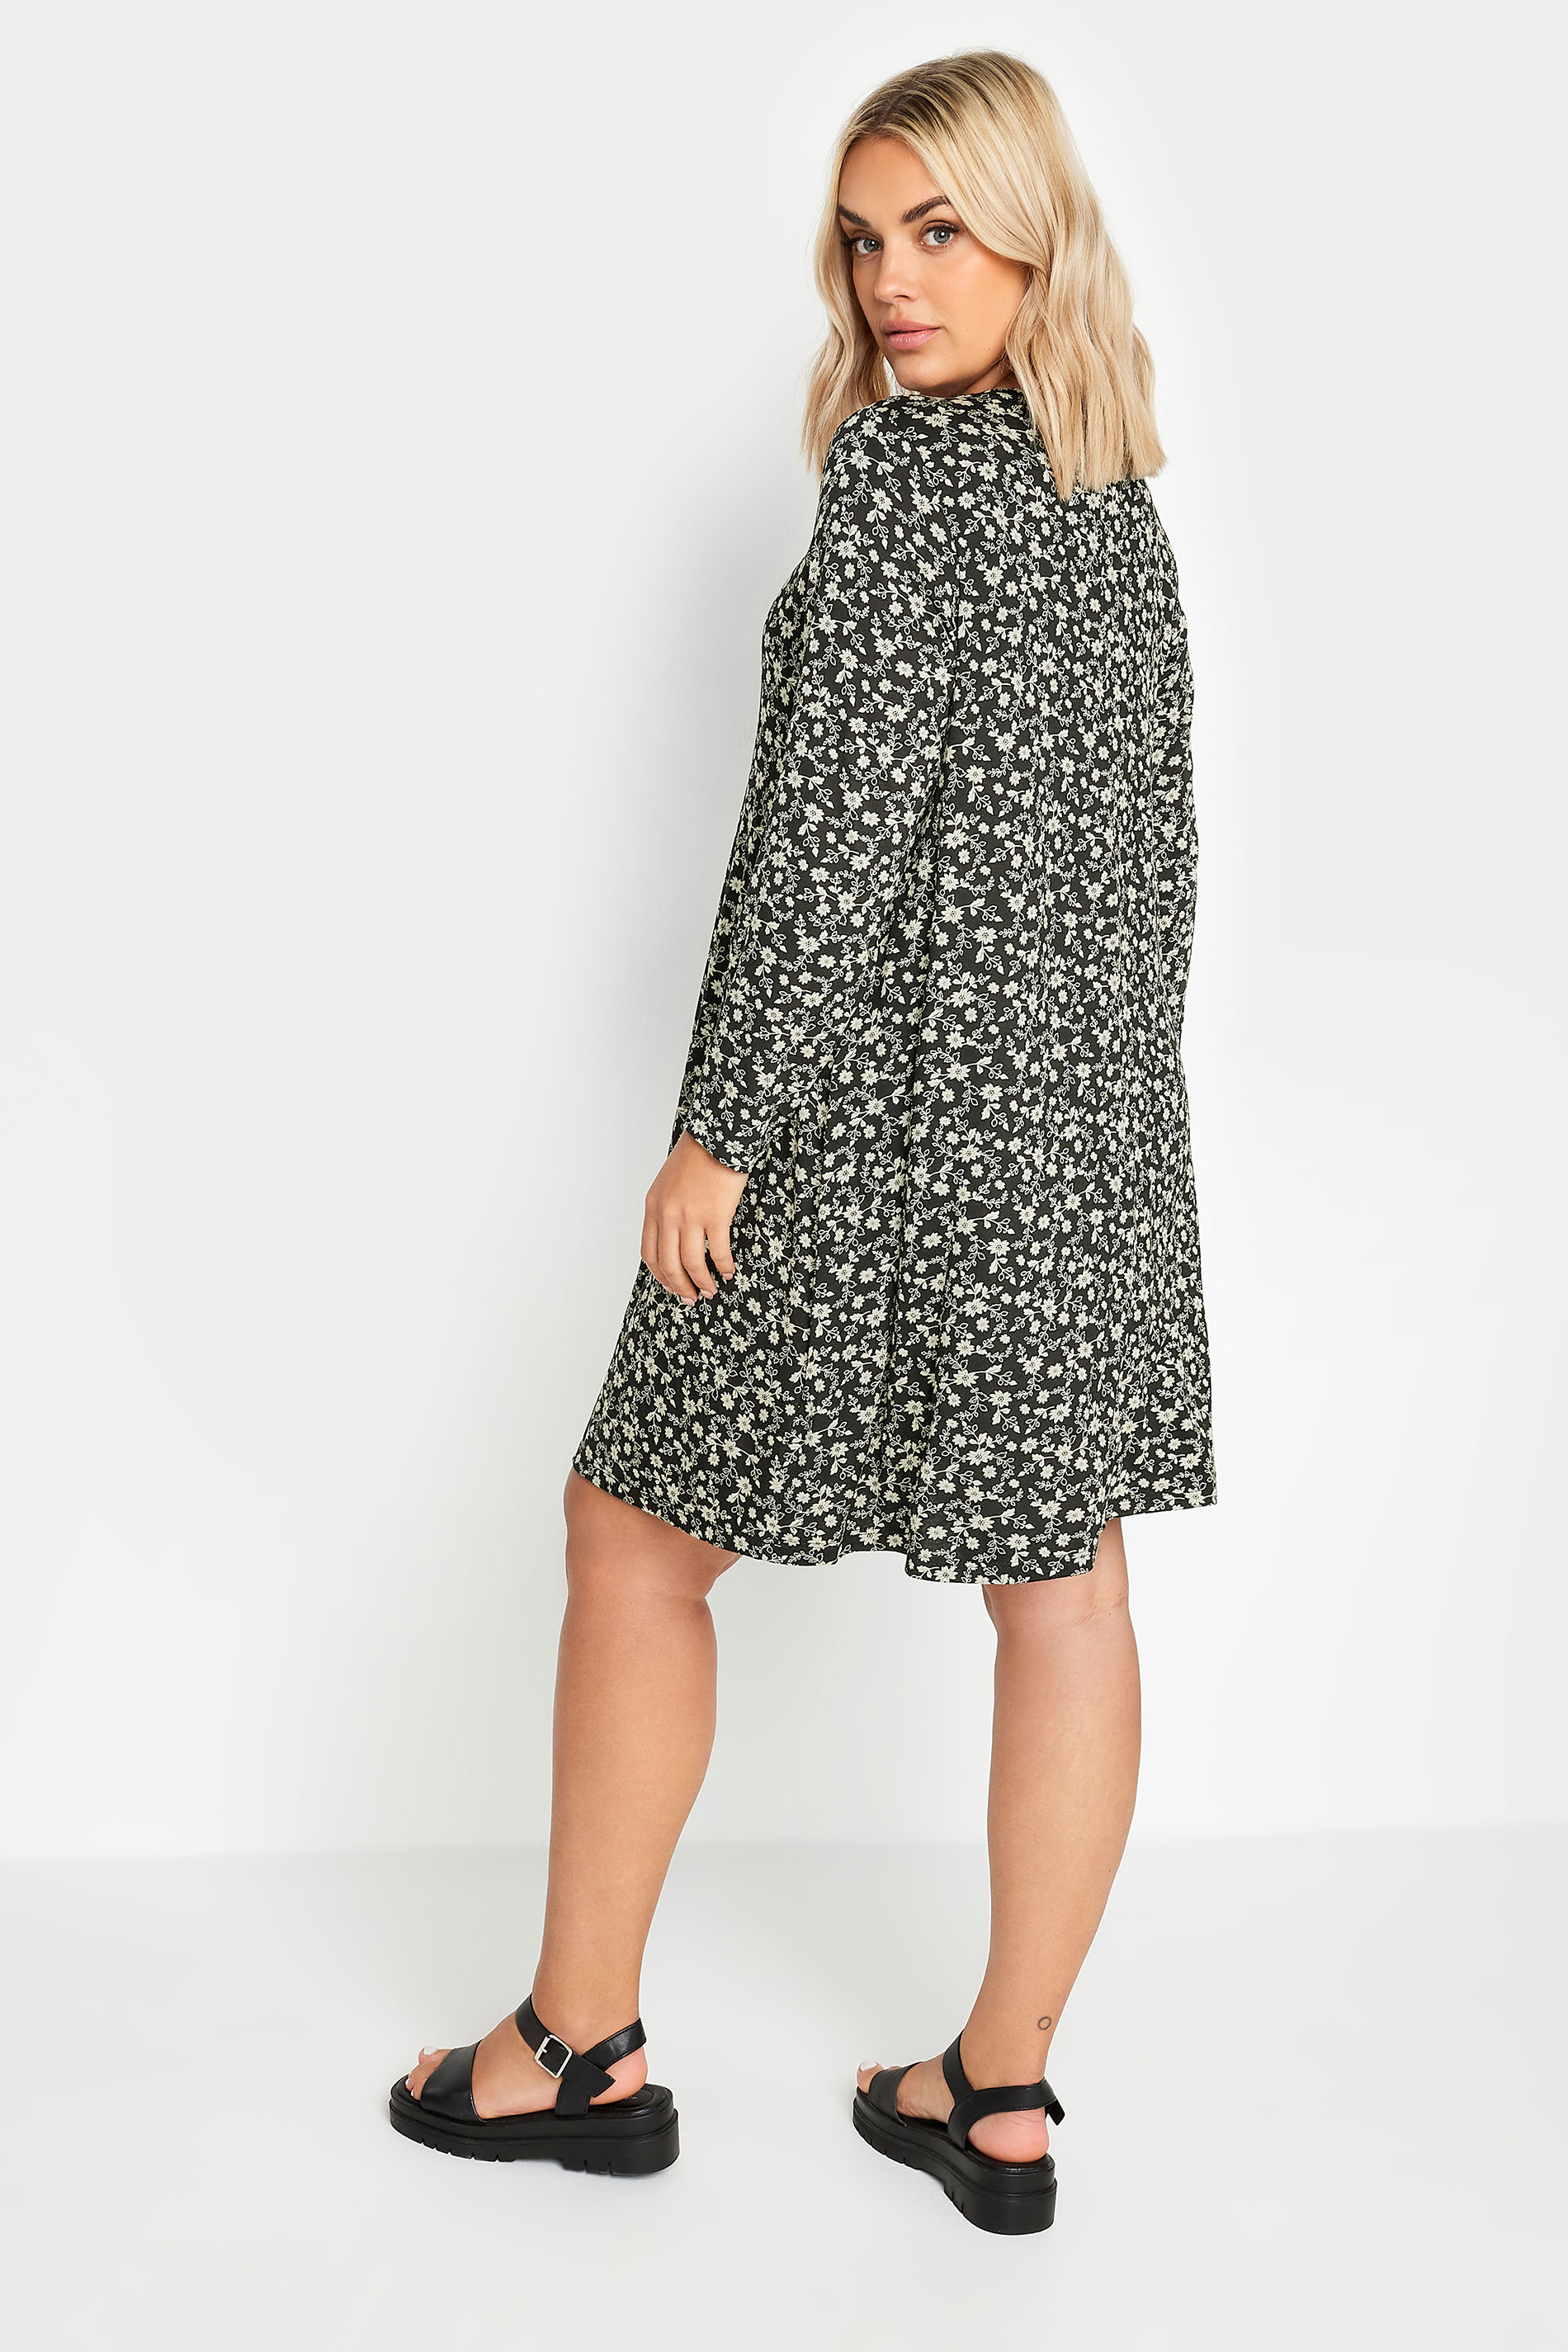 YOURS Plus Size Black Ditsy Floral Print Swing Dress | Yours Clothing 3